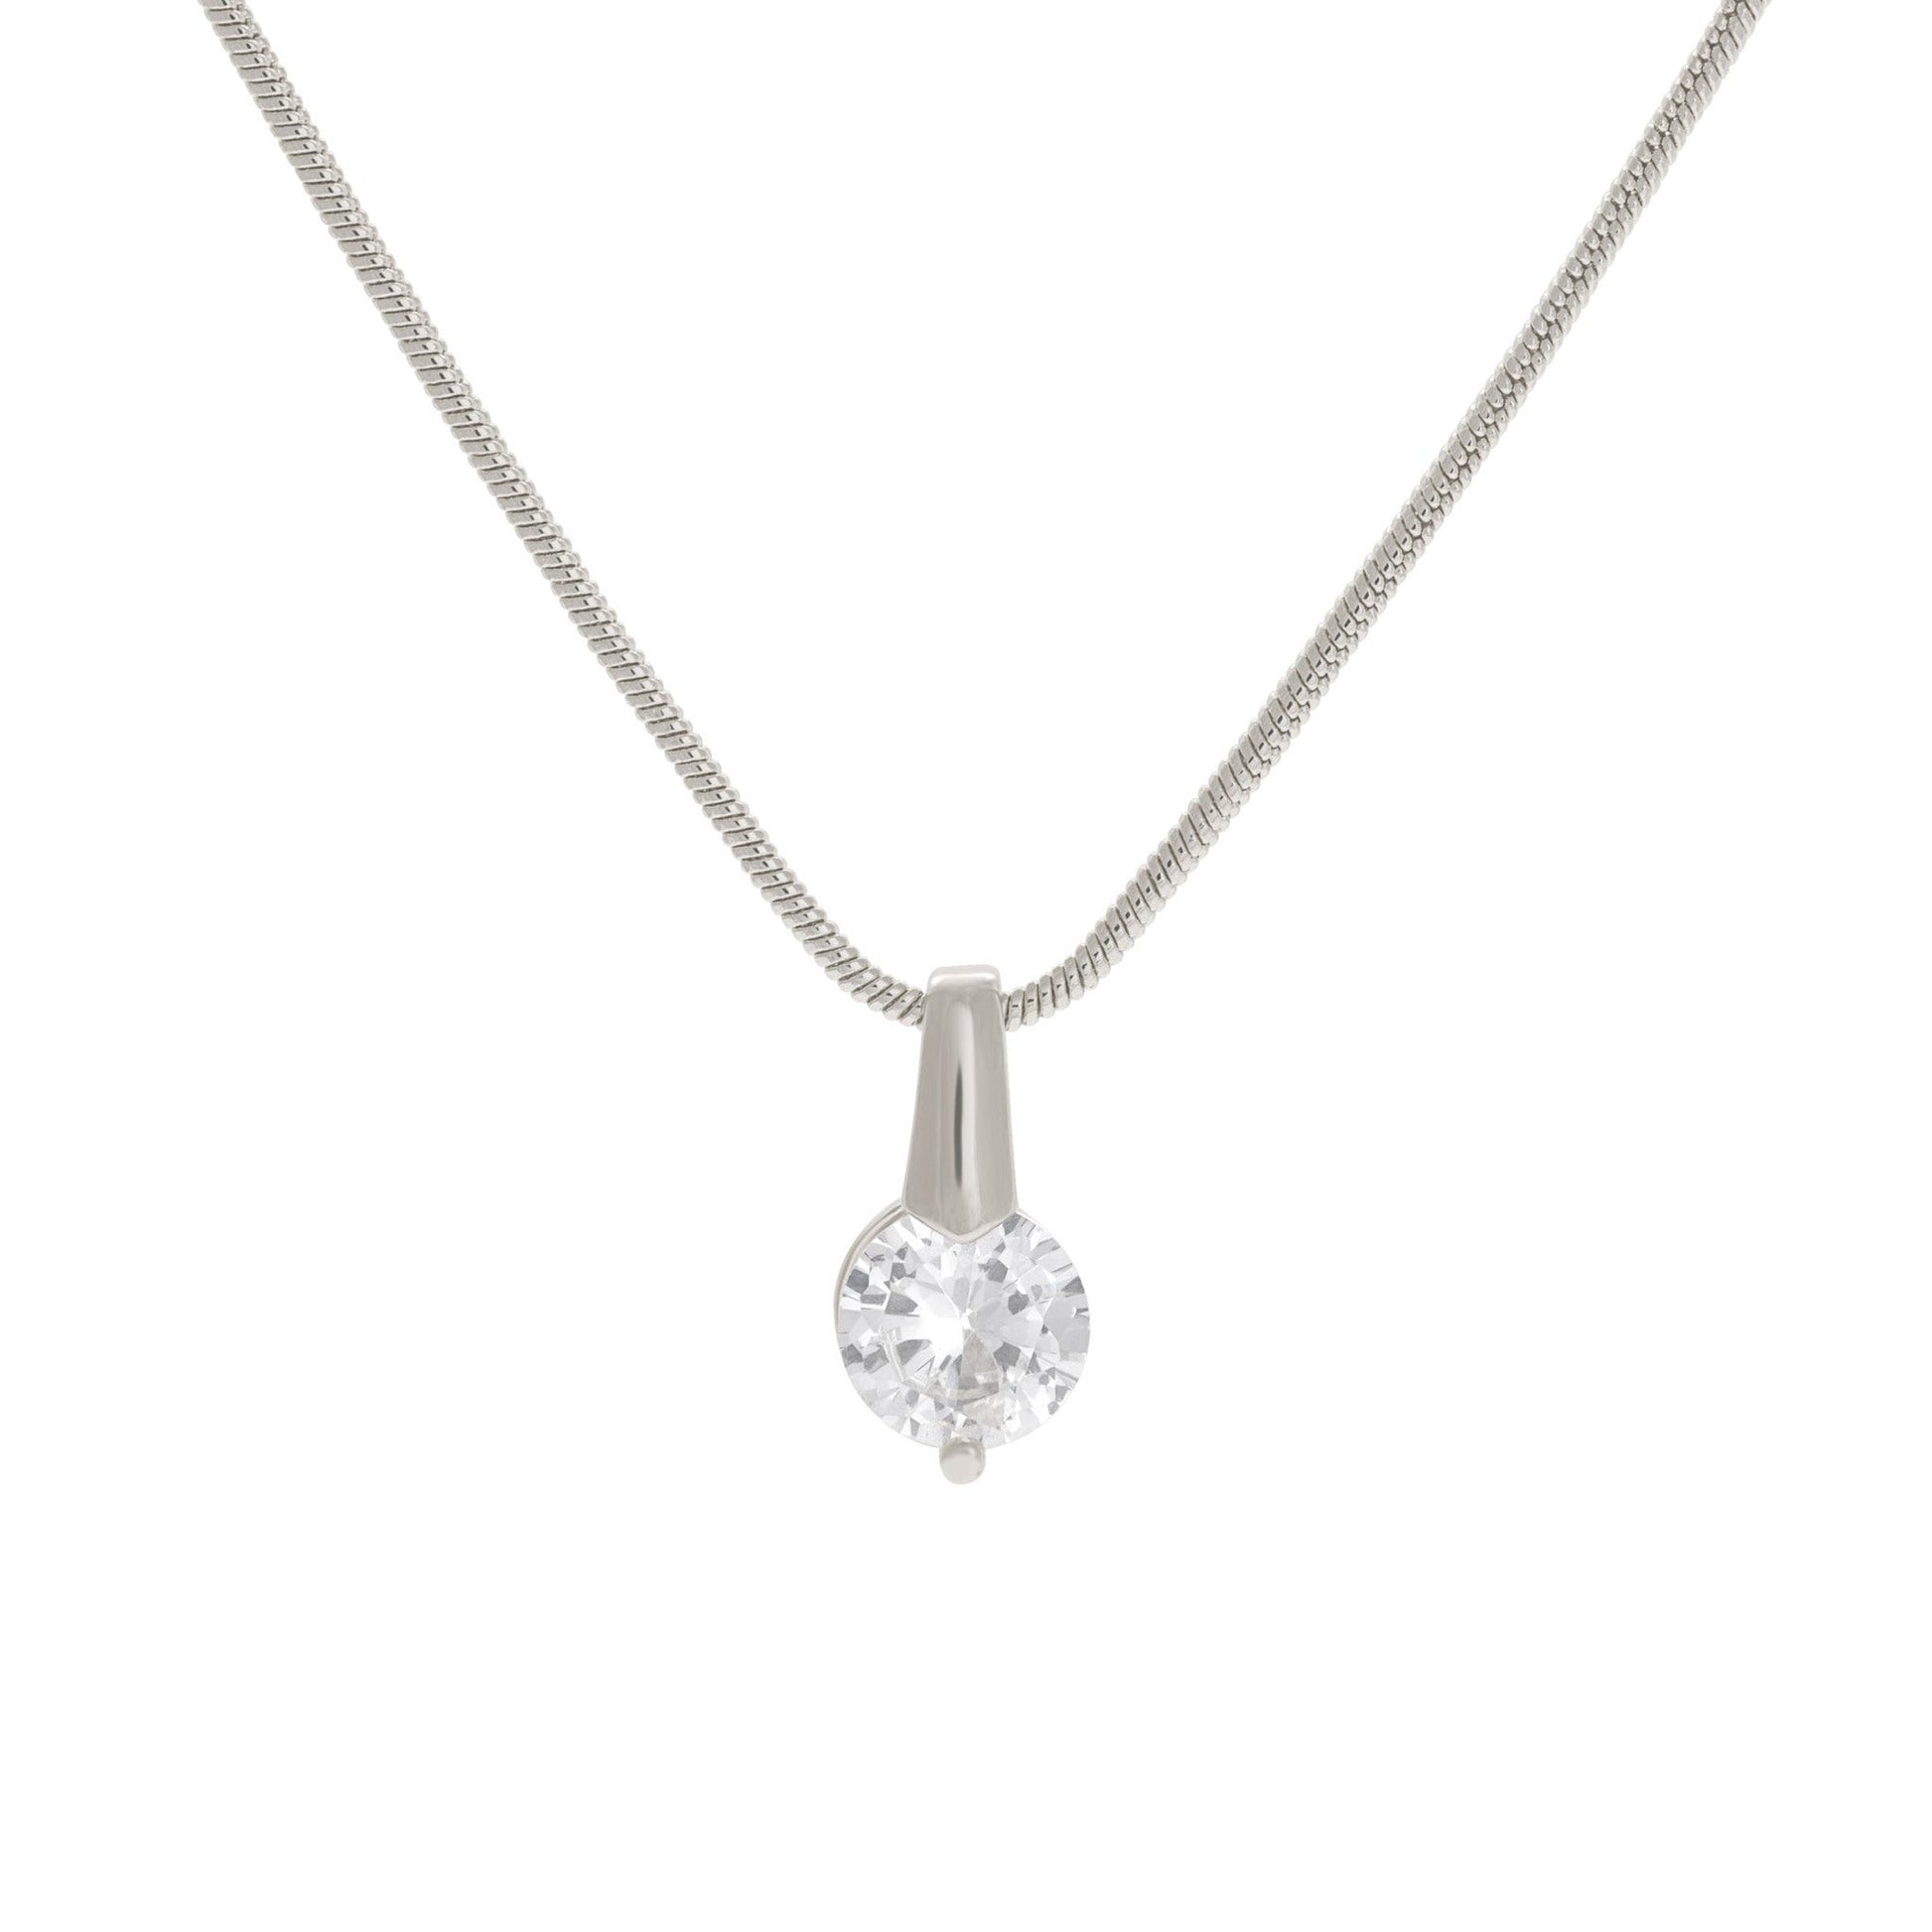 A two prong simulated diamond necklace displayed on a neutral white background.